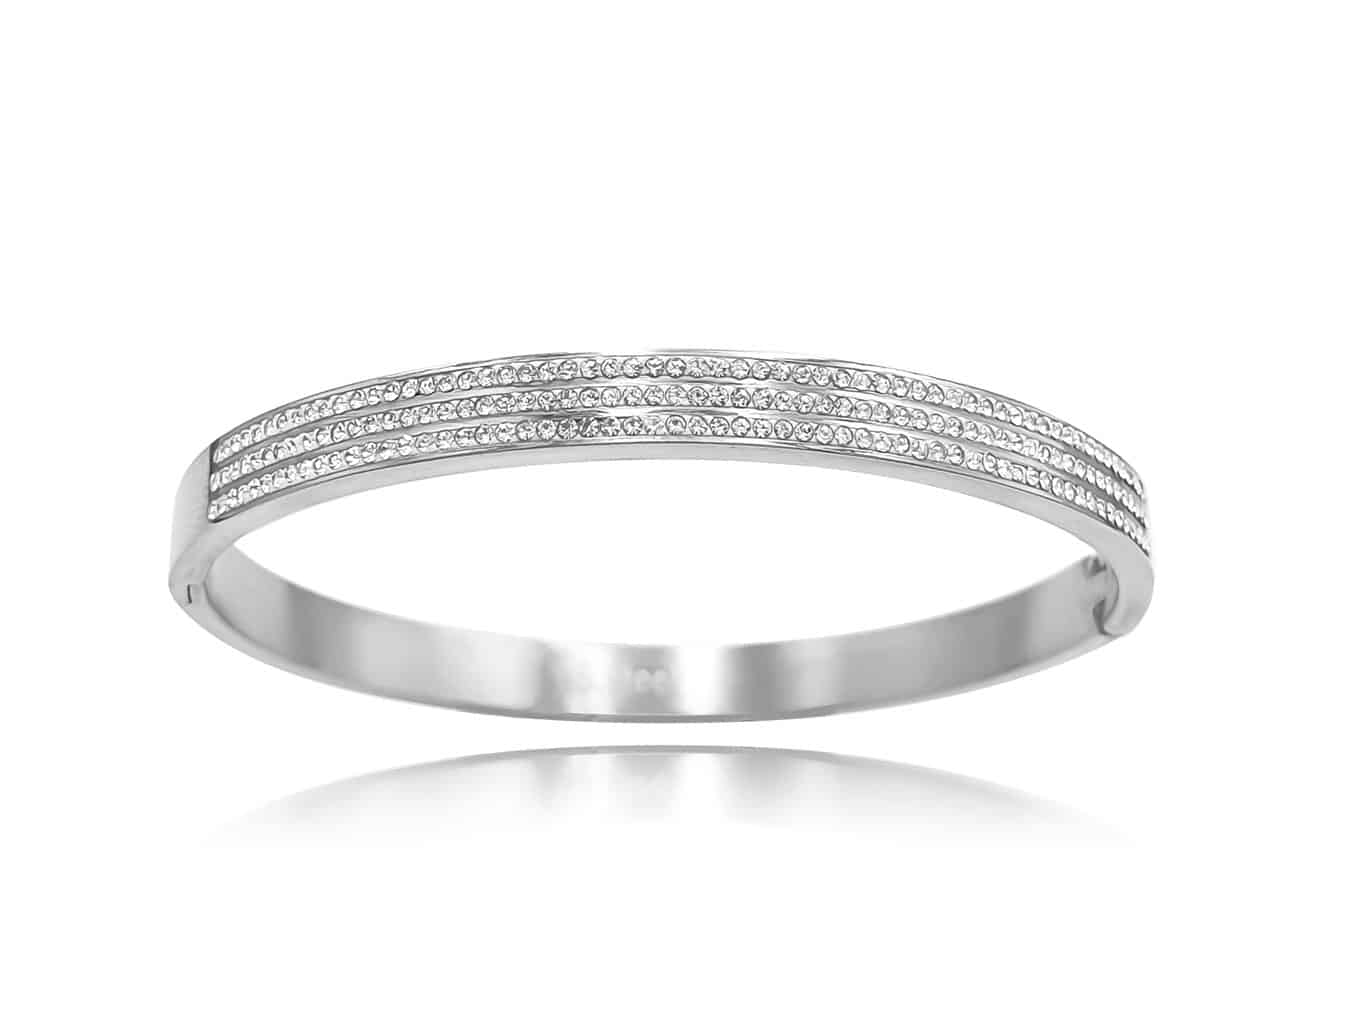 Sparkling Thick Bracelet Silver Plated - Adema